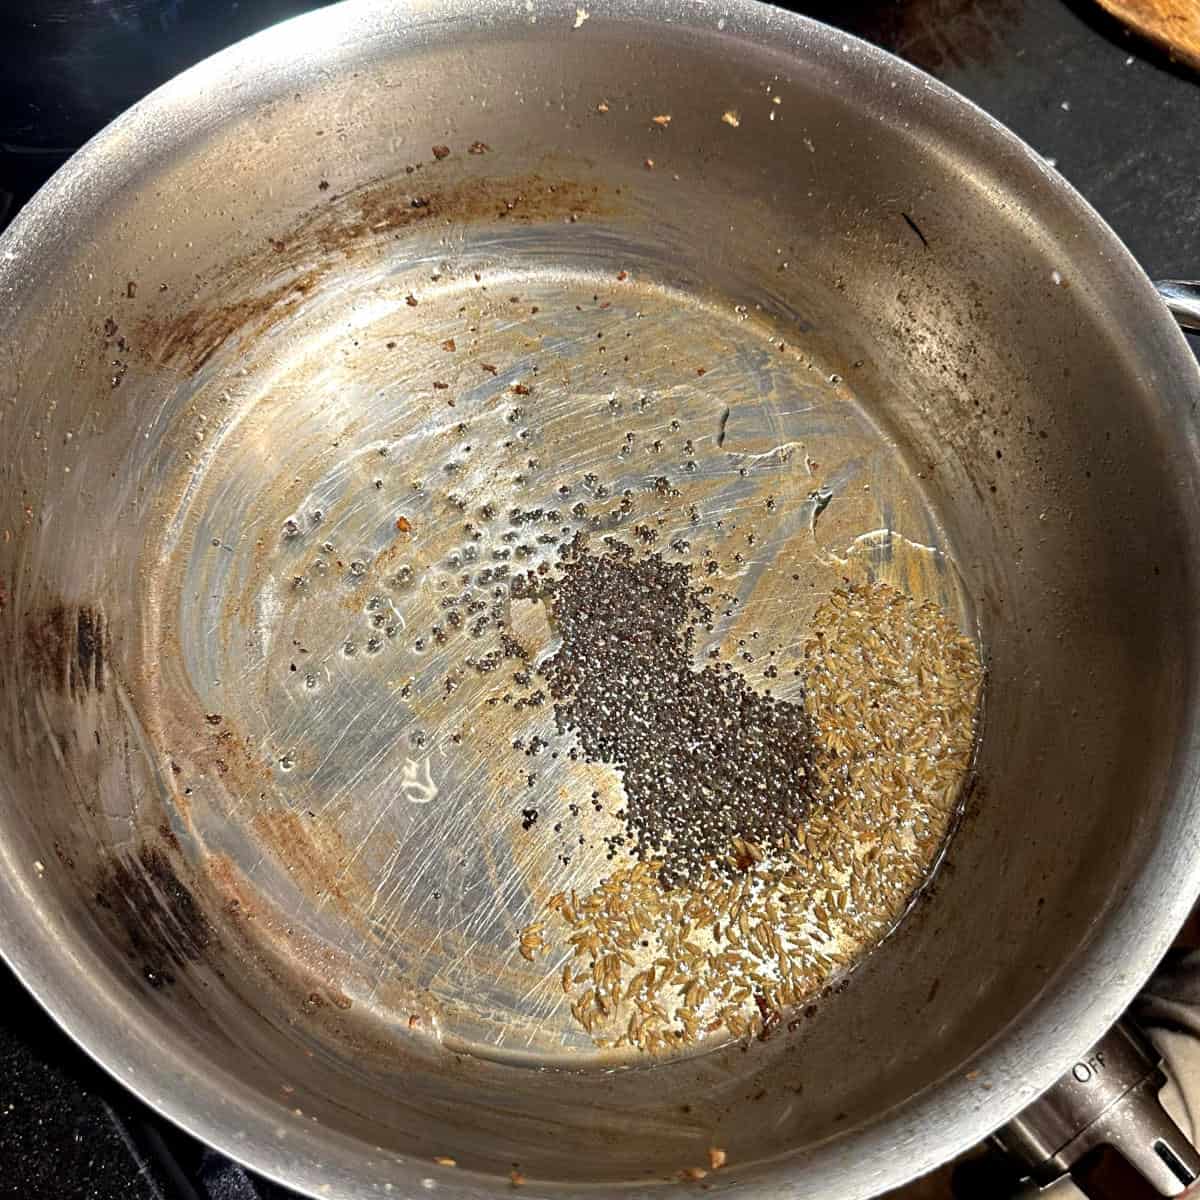 Mustard seeds and cumin seeds in oil.